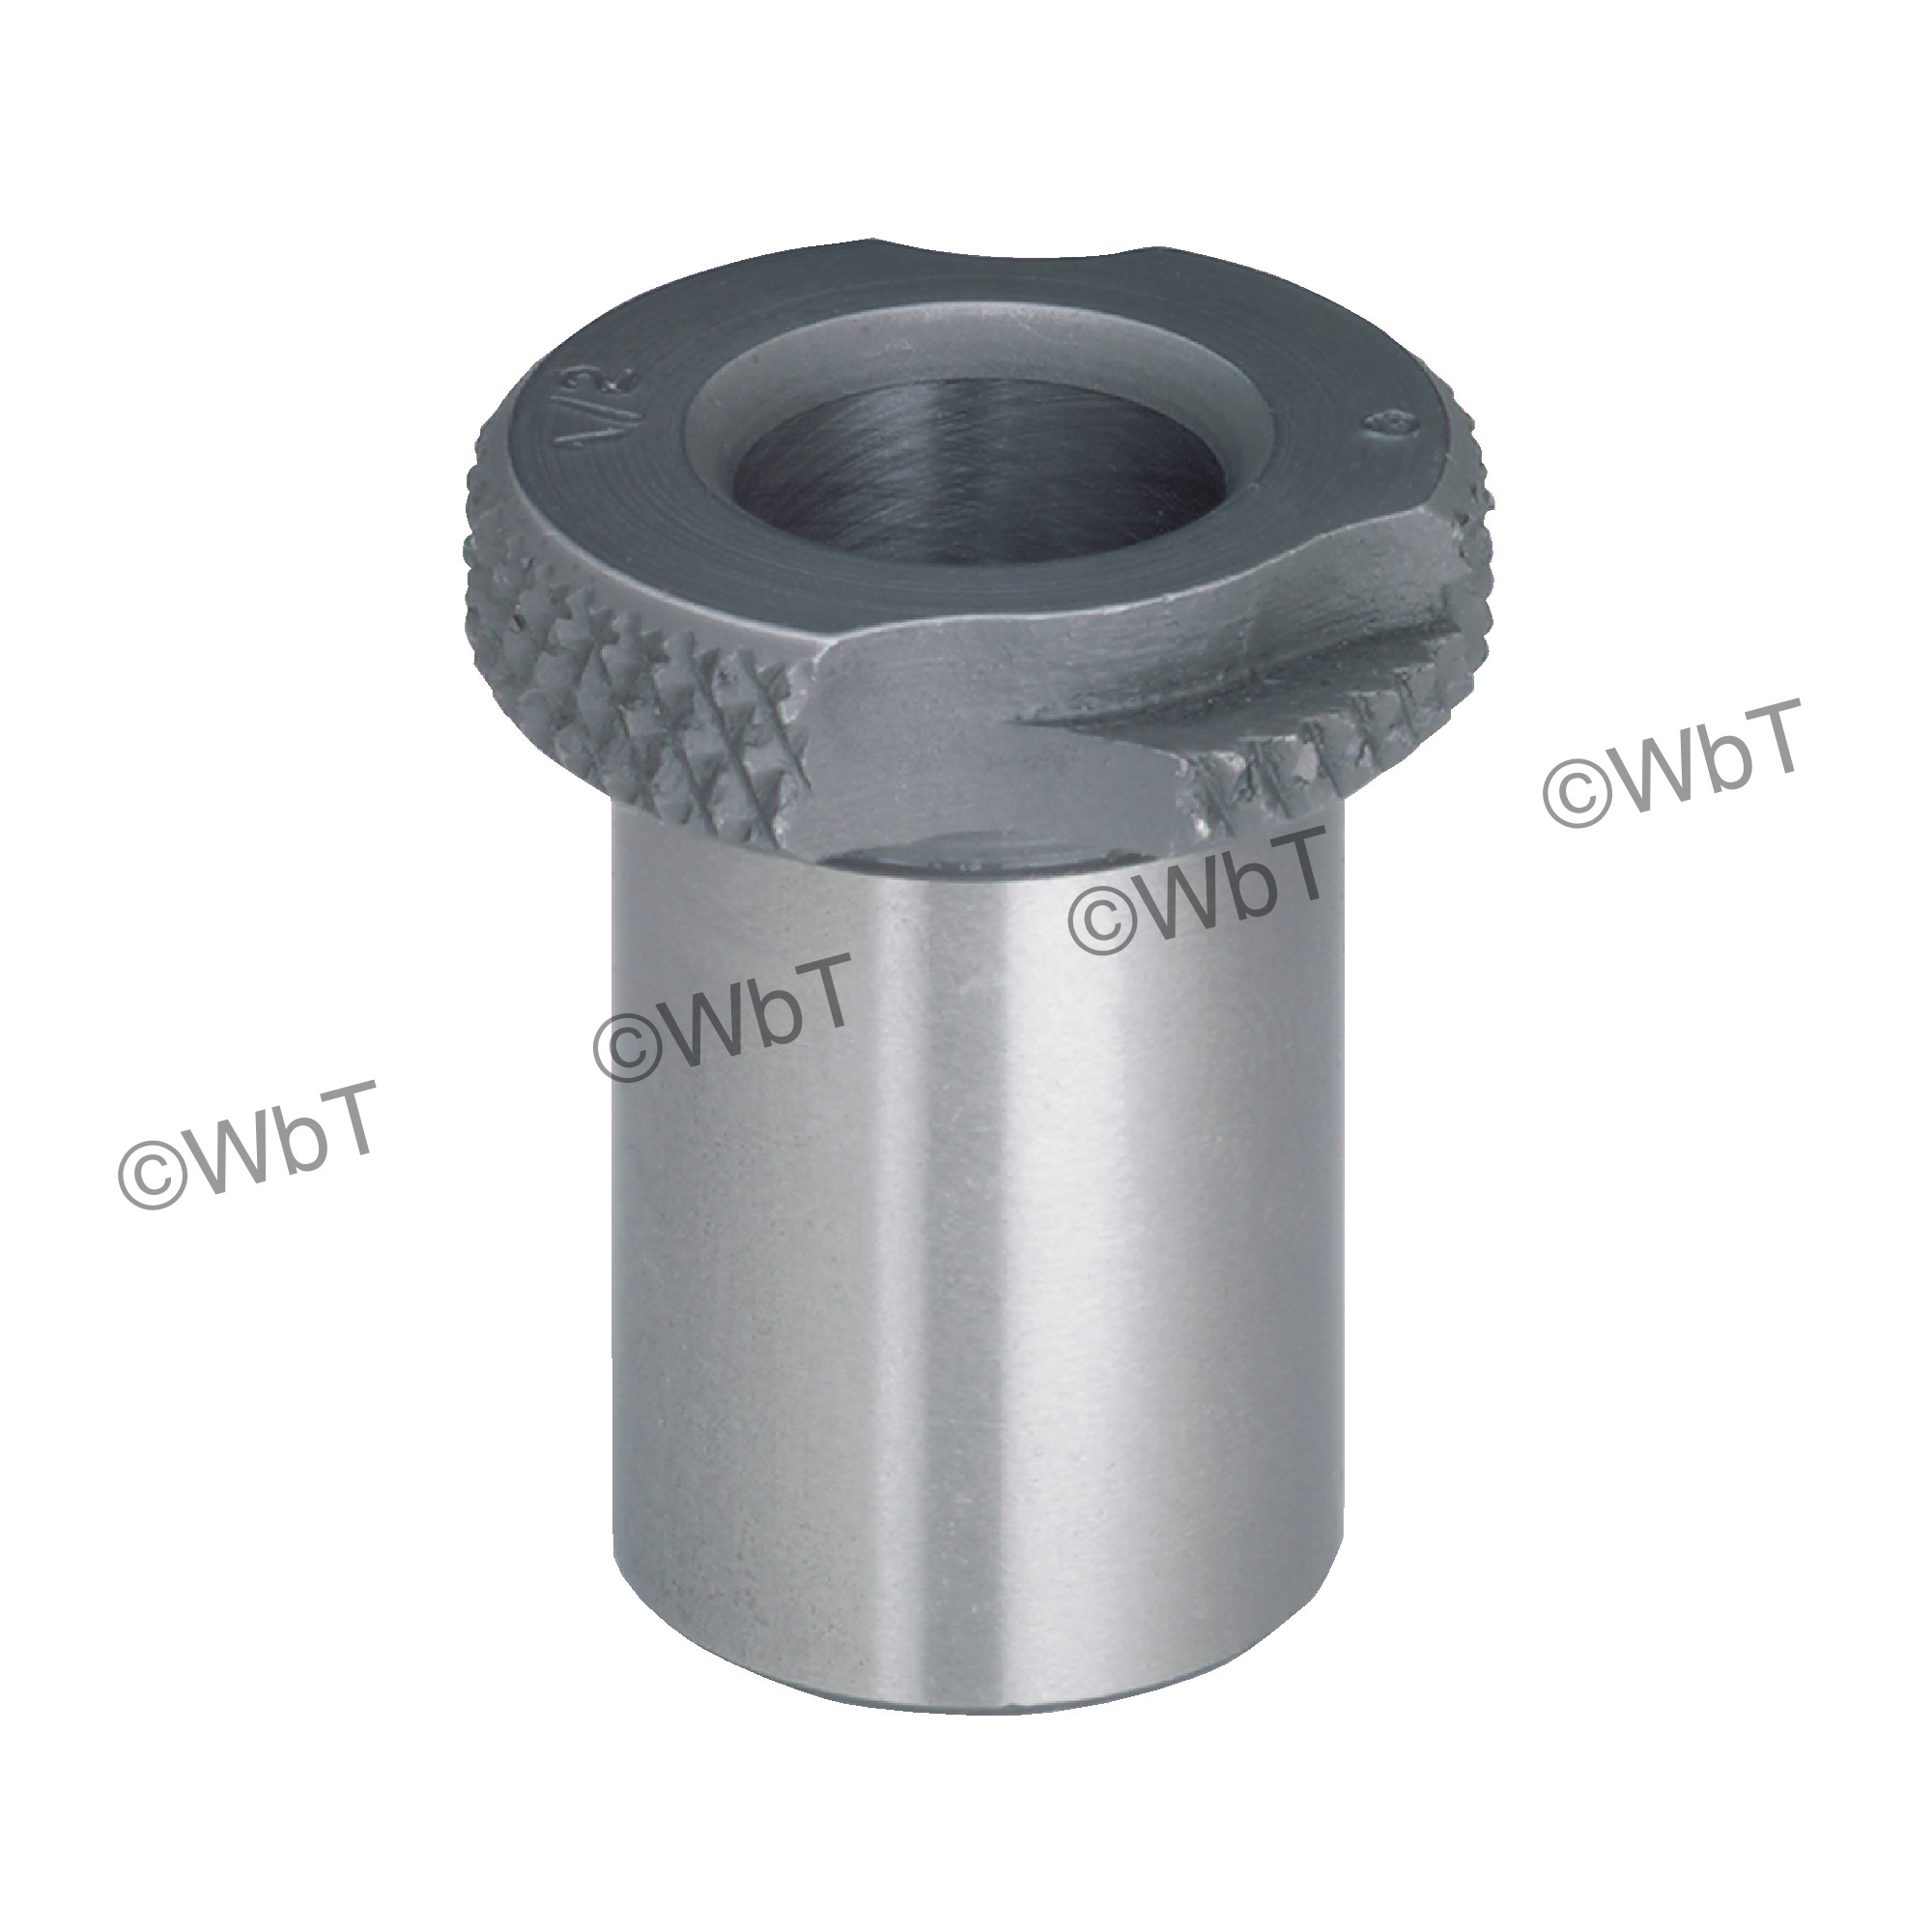 24 internal thread 3×5C Collet Stop Fits any 5C ID threaded collet with 1-3/64" 